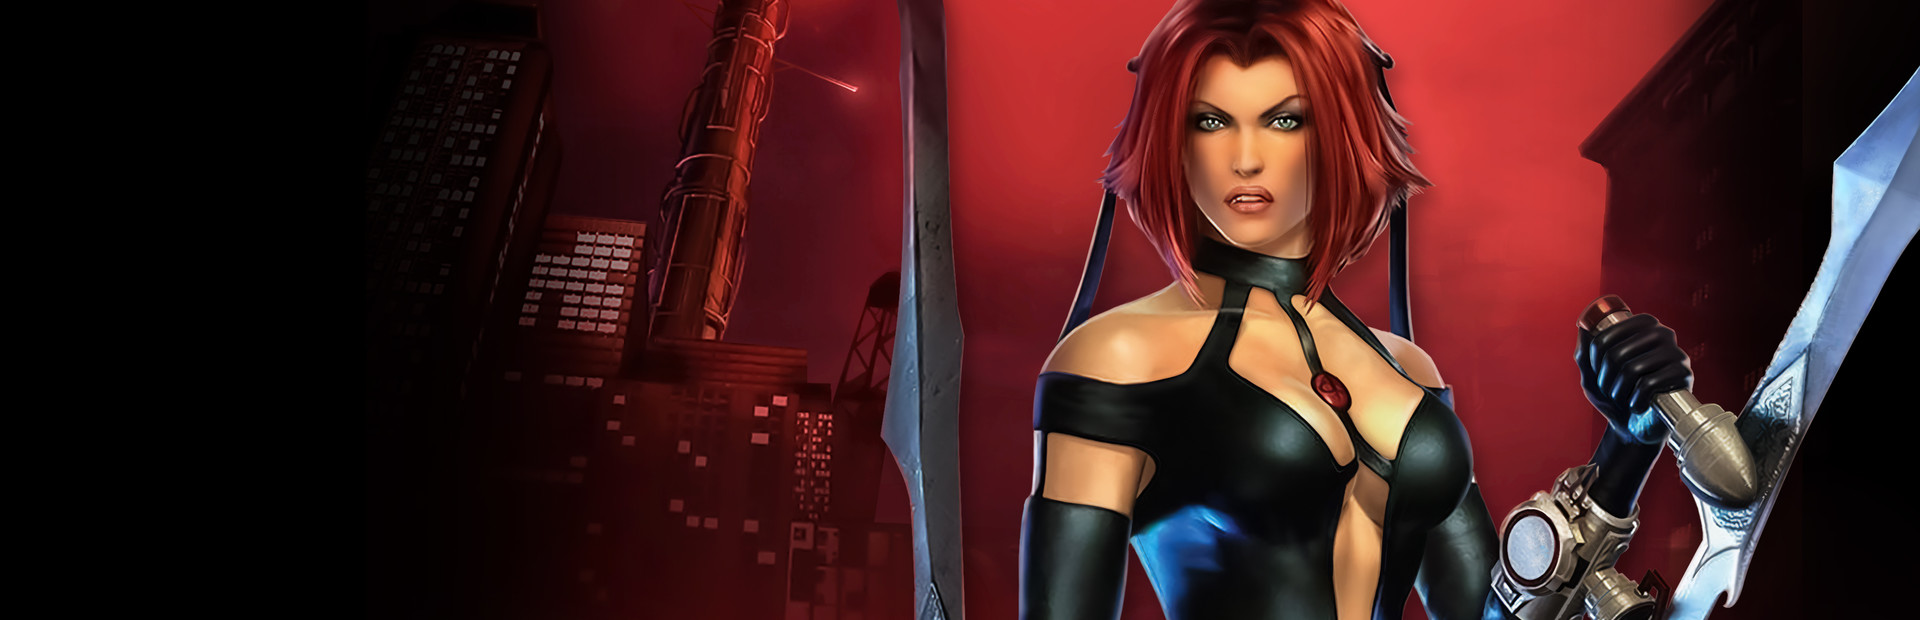 BloodRayne 2: Terminal Cut cover image